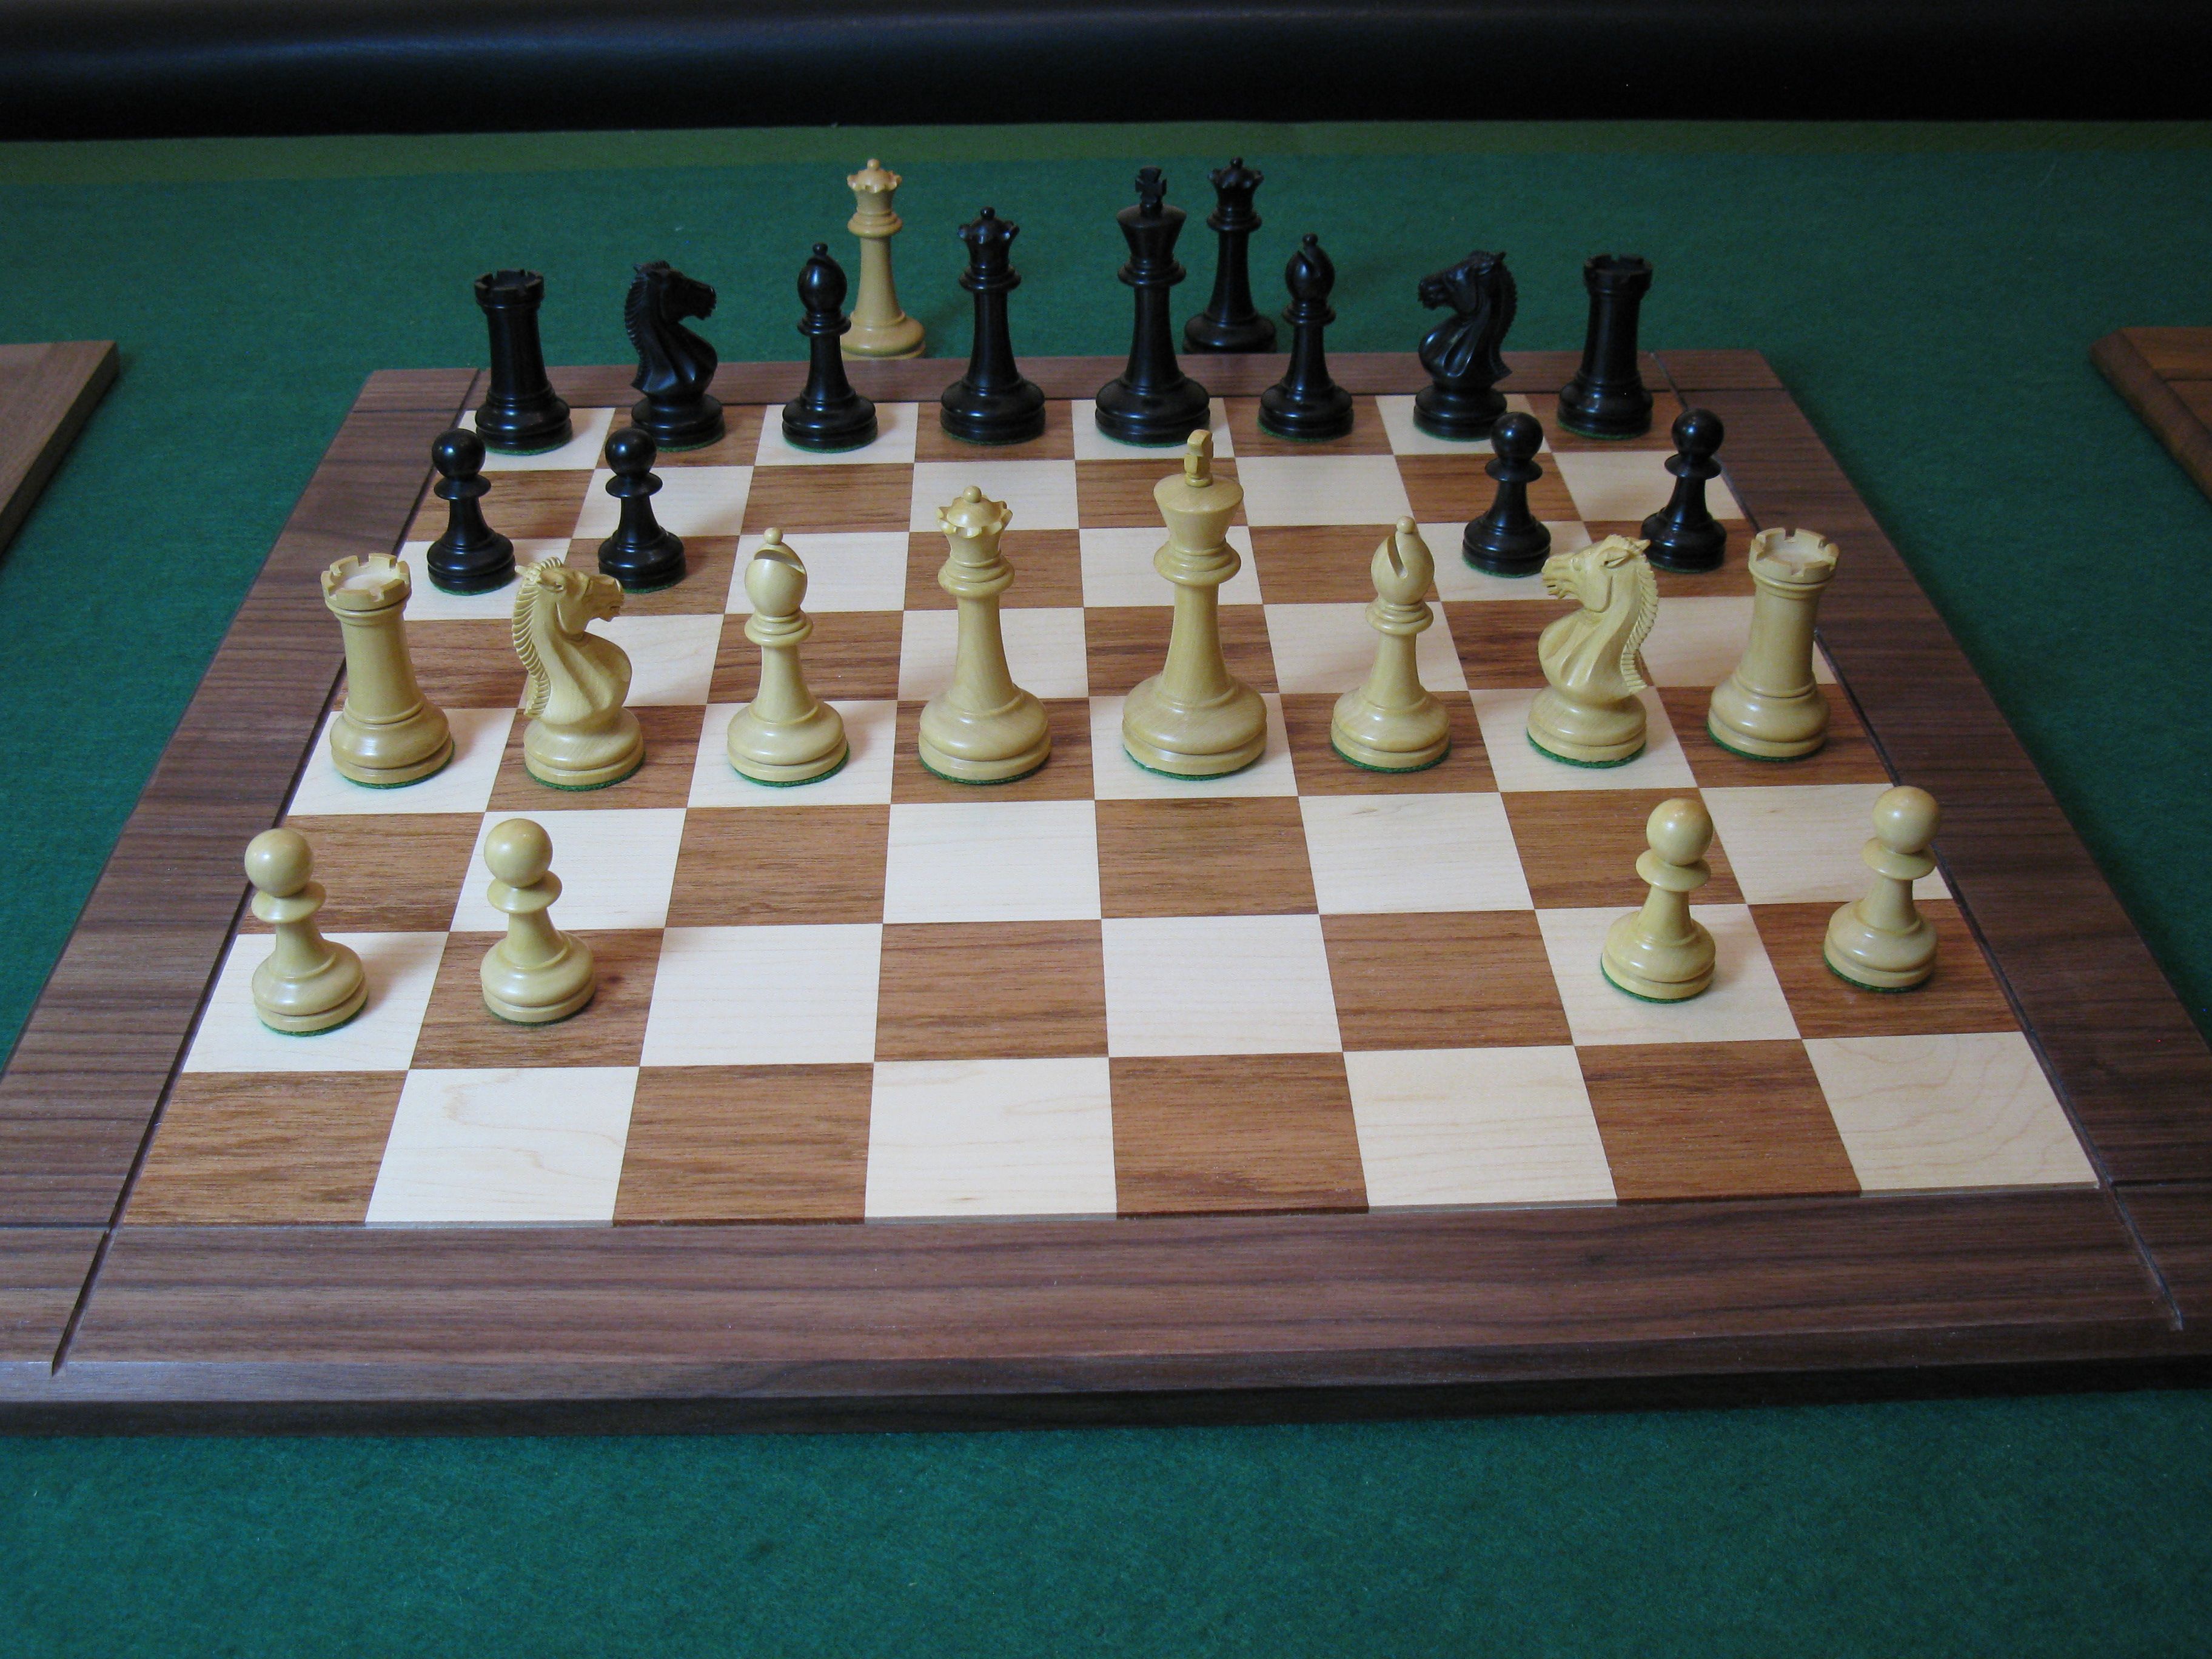 3.0" King The Classic Chess Set Ebonized Boxwood Pieces Only 